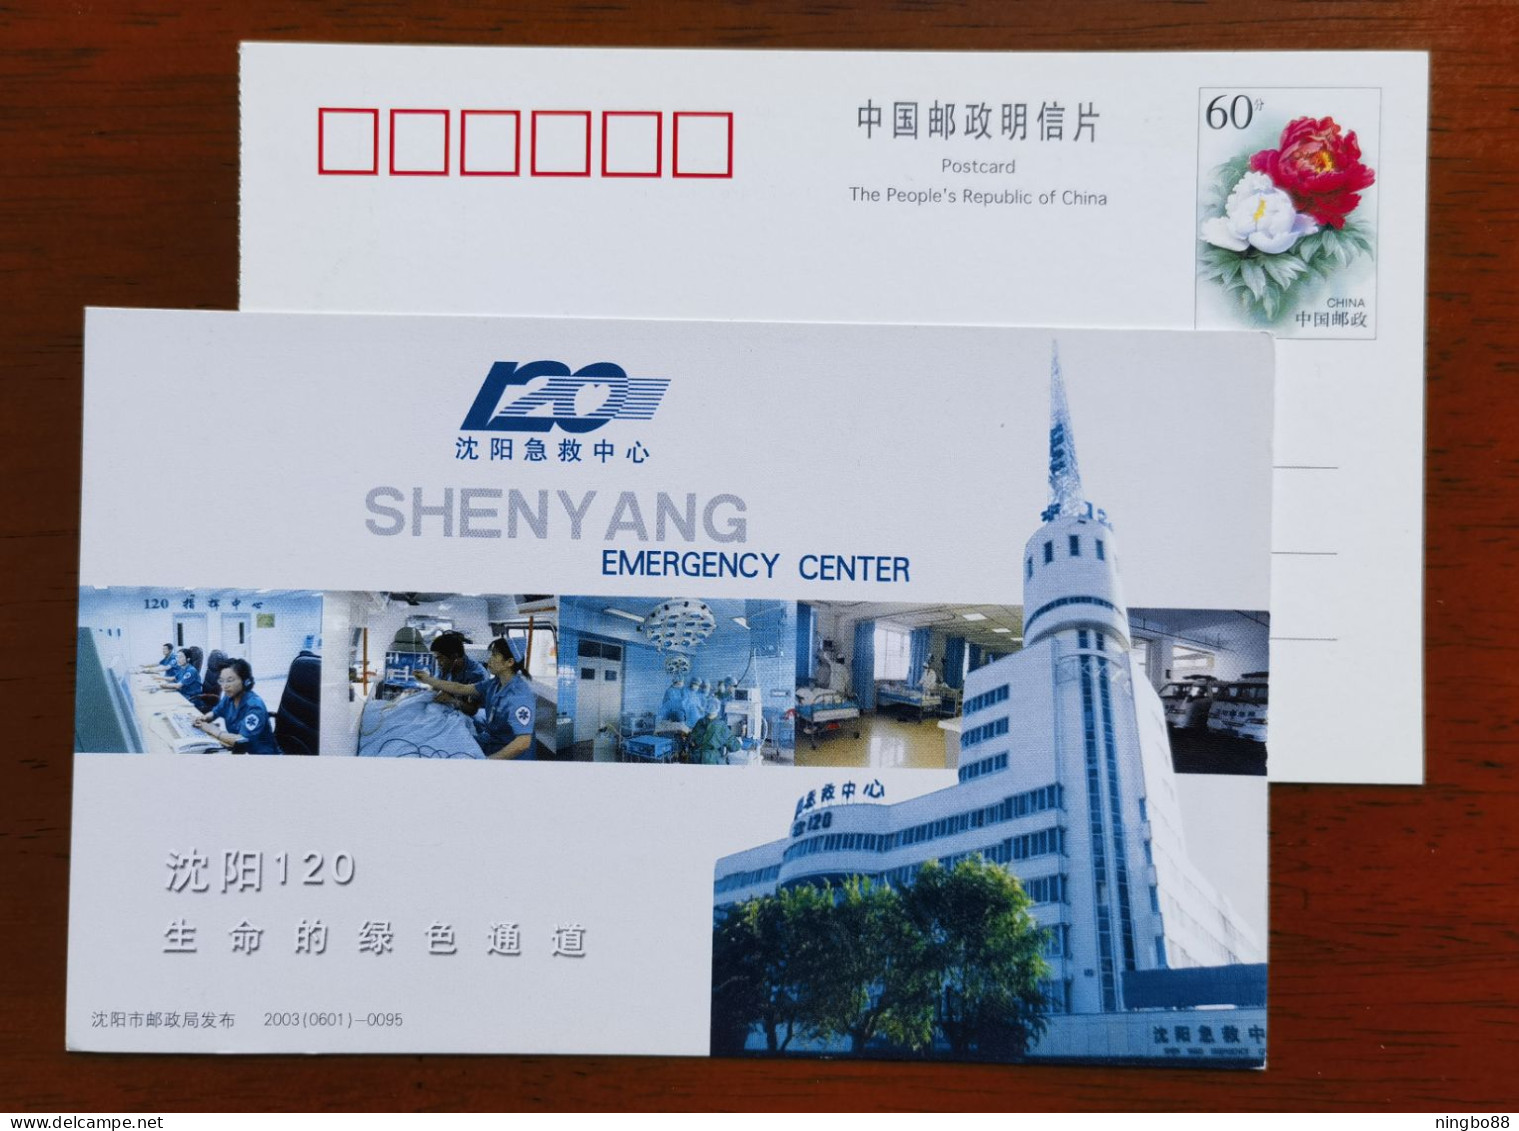 120 The Green Channel Of Life,Command Center,ambulance,China 2003 Shenyang Emergency Center Advertising Pre-stamped Card - EHBO